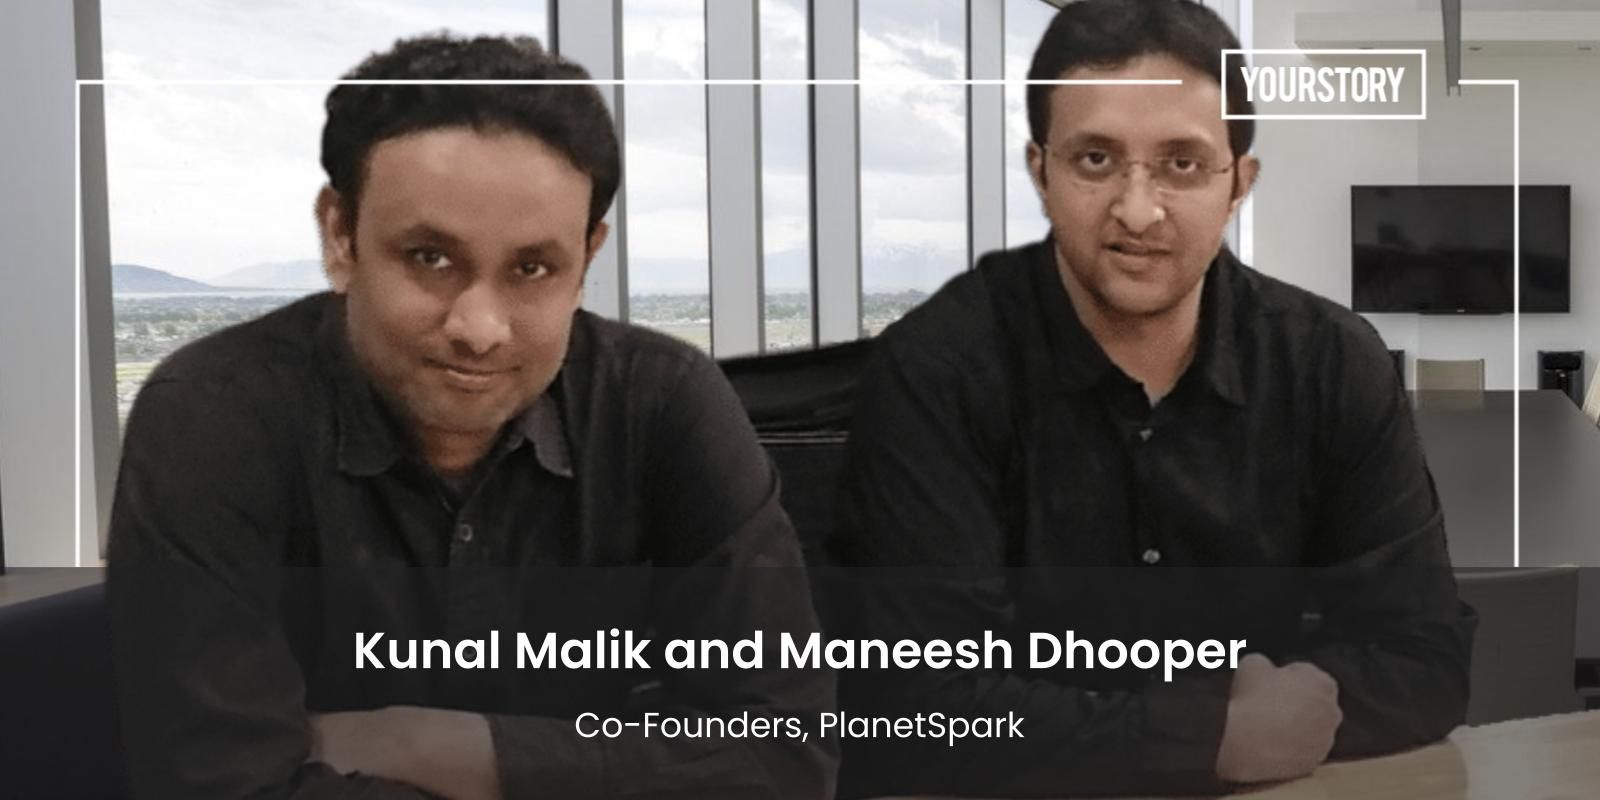 [Funding alert] Edtech startup PlanetSpark raises $13.5M in Series B from Prime Venture Partners and others